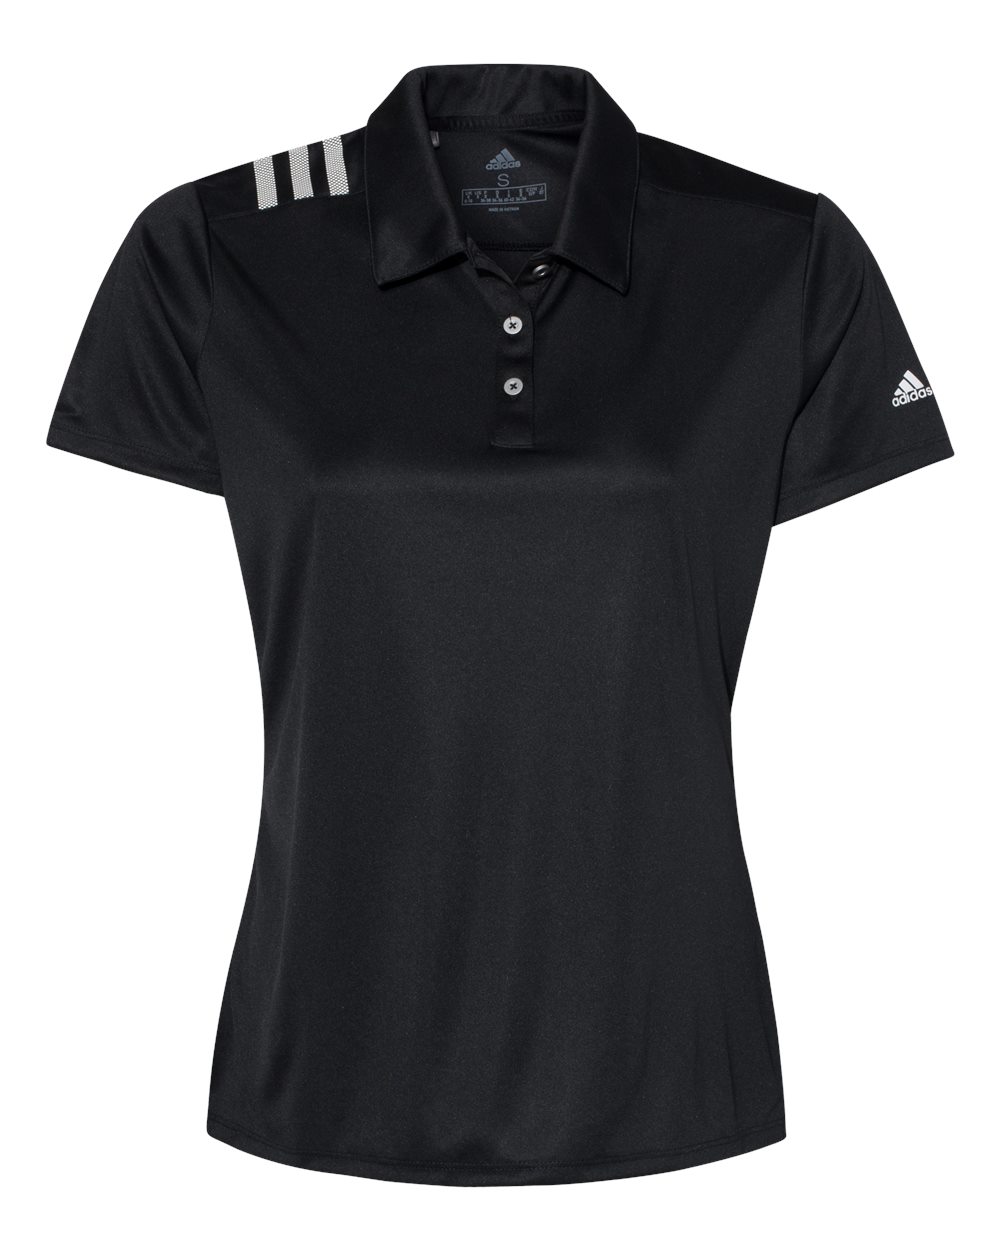 Picture of Adidas Women's 3-Stripes Shoulder Polo